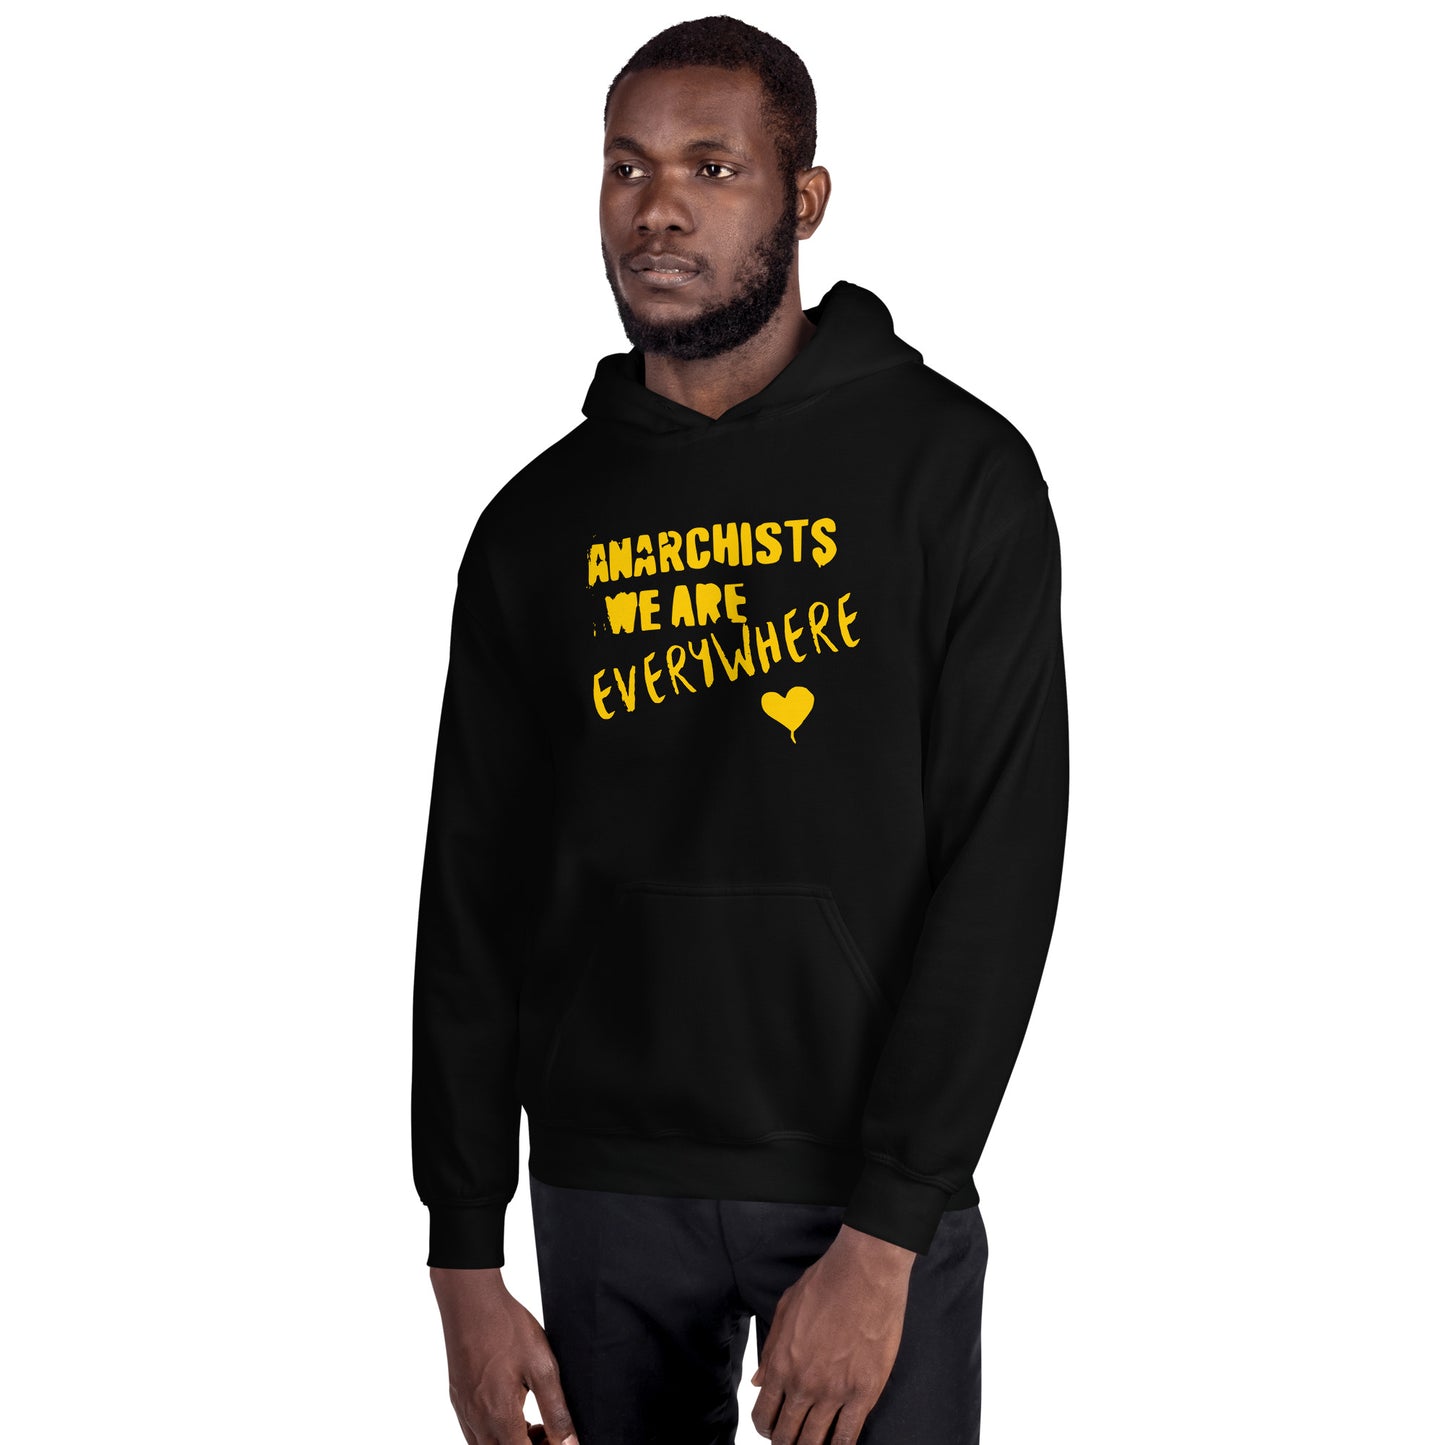 Anarchy Wear "We Are Every Where" Gold Unisex Hoodie